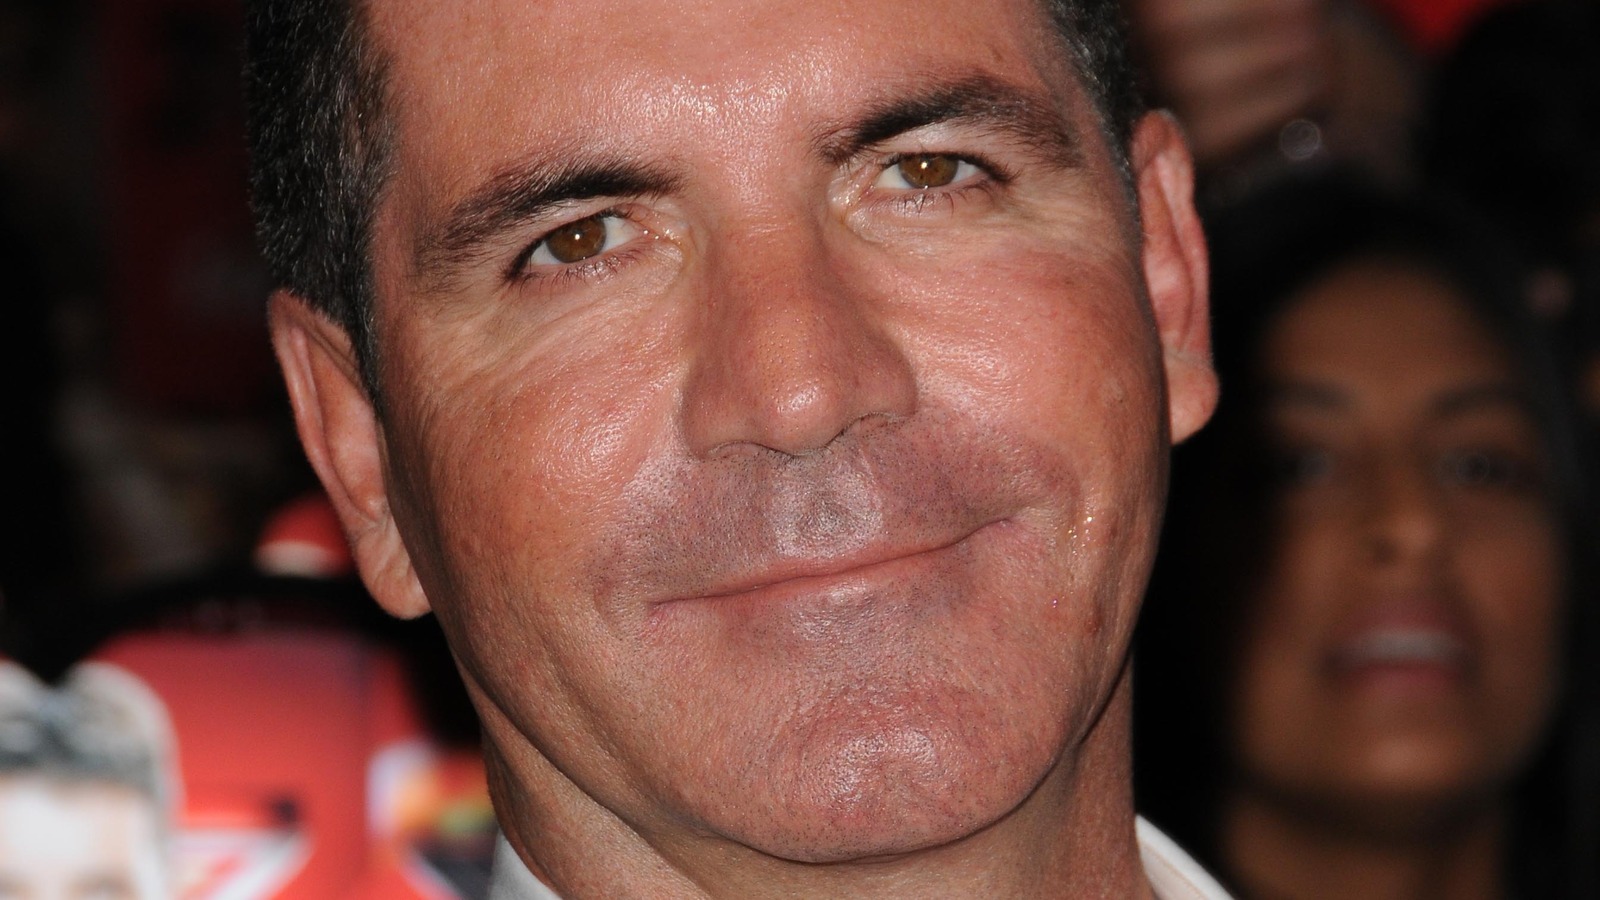 What Simon Cowell Was Doing Before American Idol